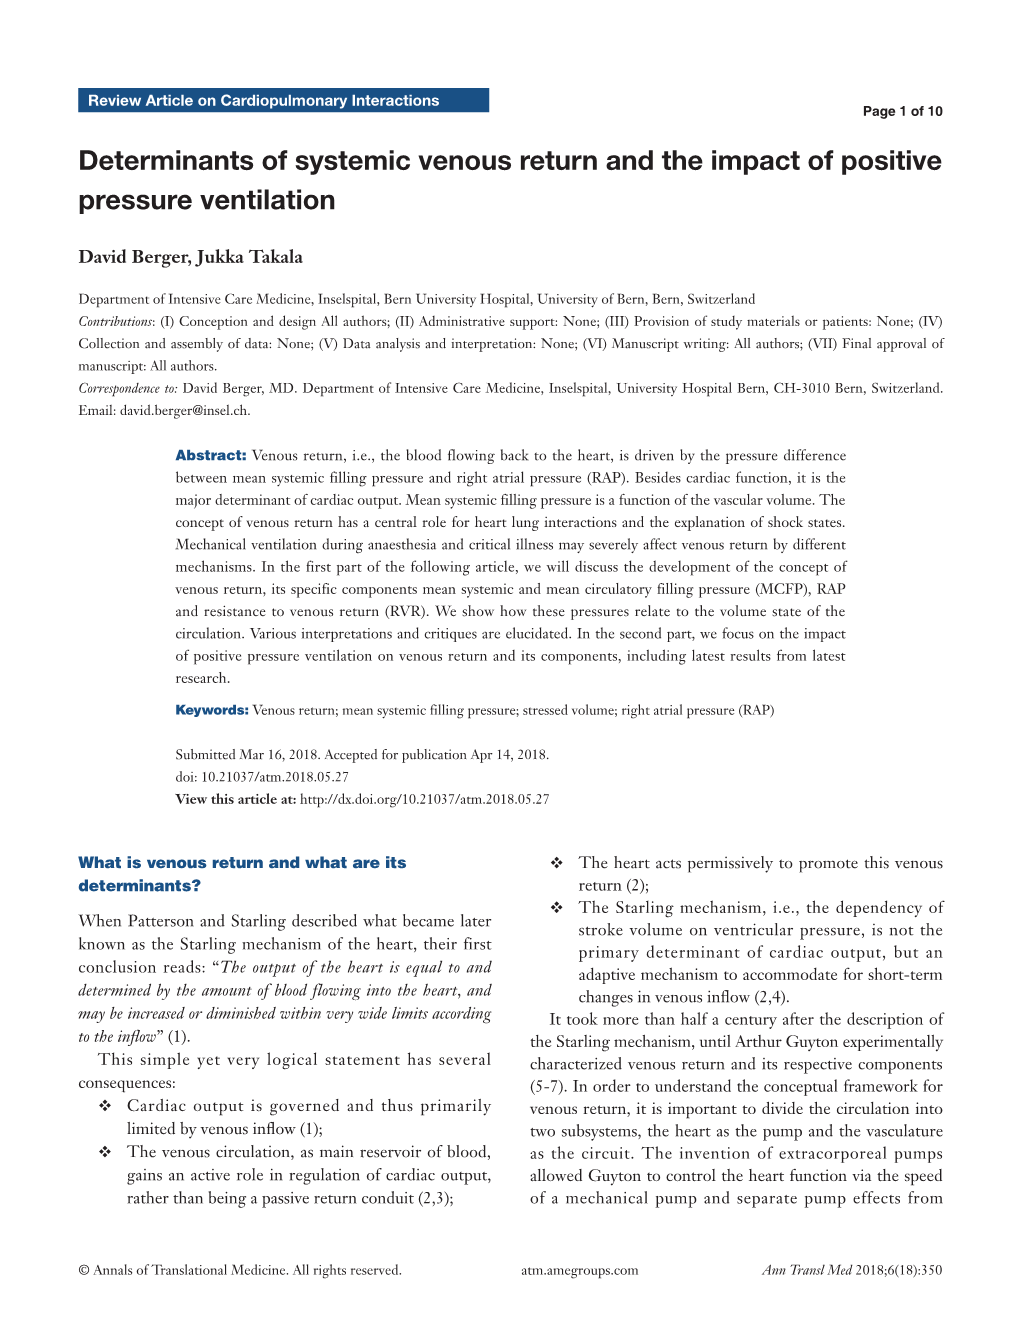 Determinants of Systemic Venous Return and the Impact of Positive Pressure Ventilation